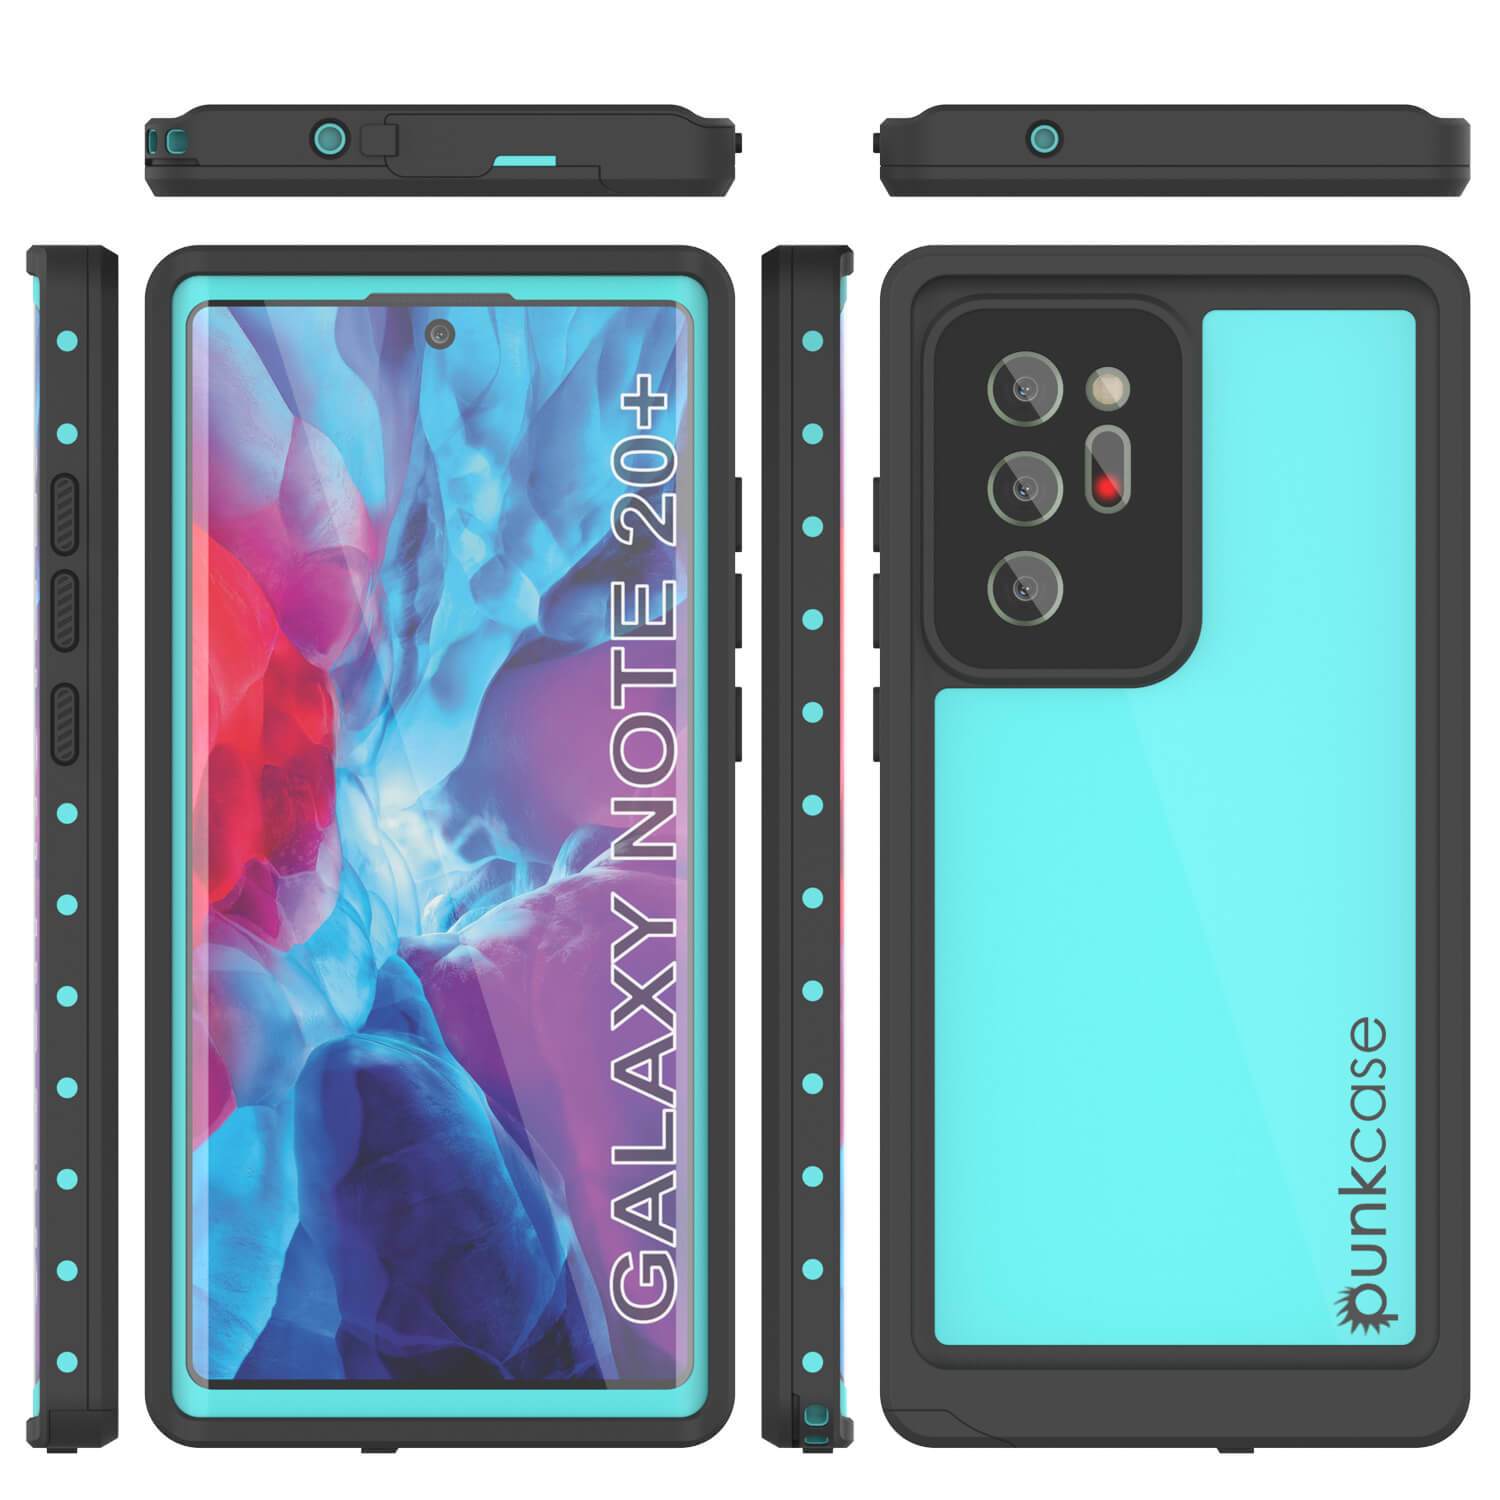 Galaxy Note 20 Ultra Waterproof Case, Punkcase Studstar Series Teal Thin Armor Cover